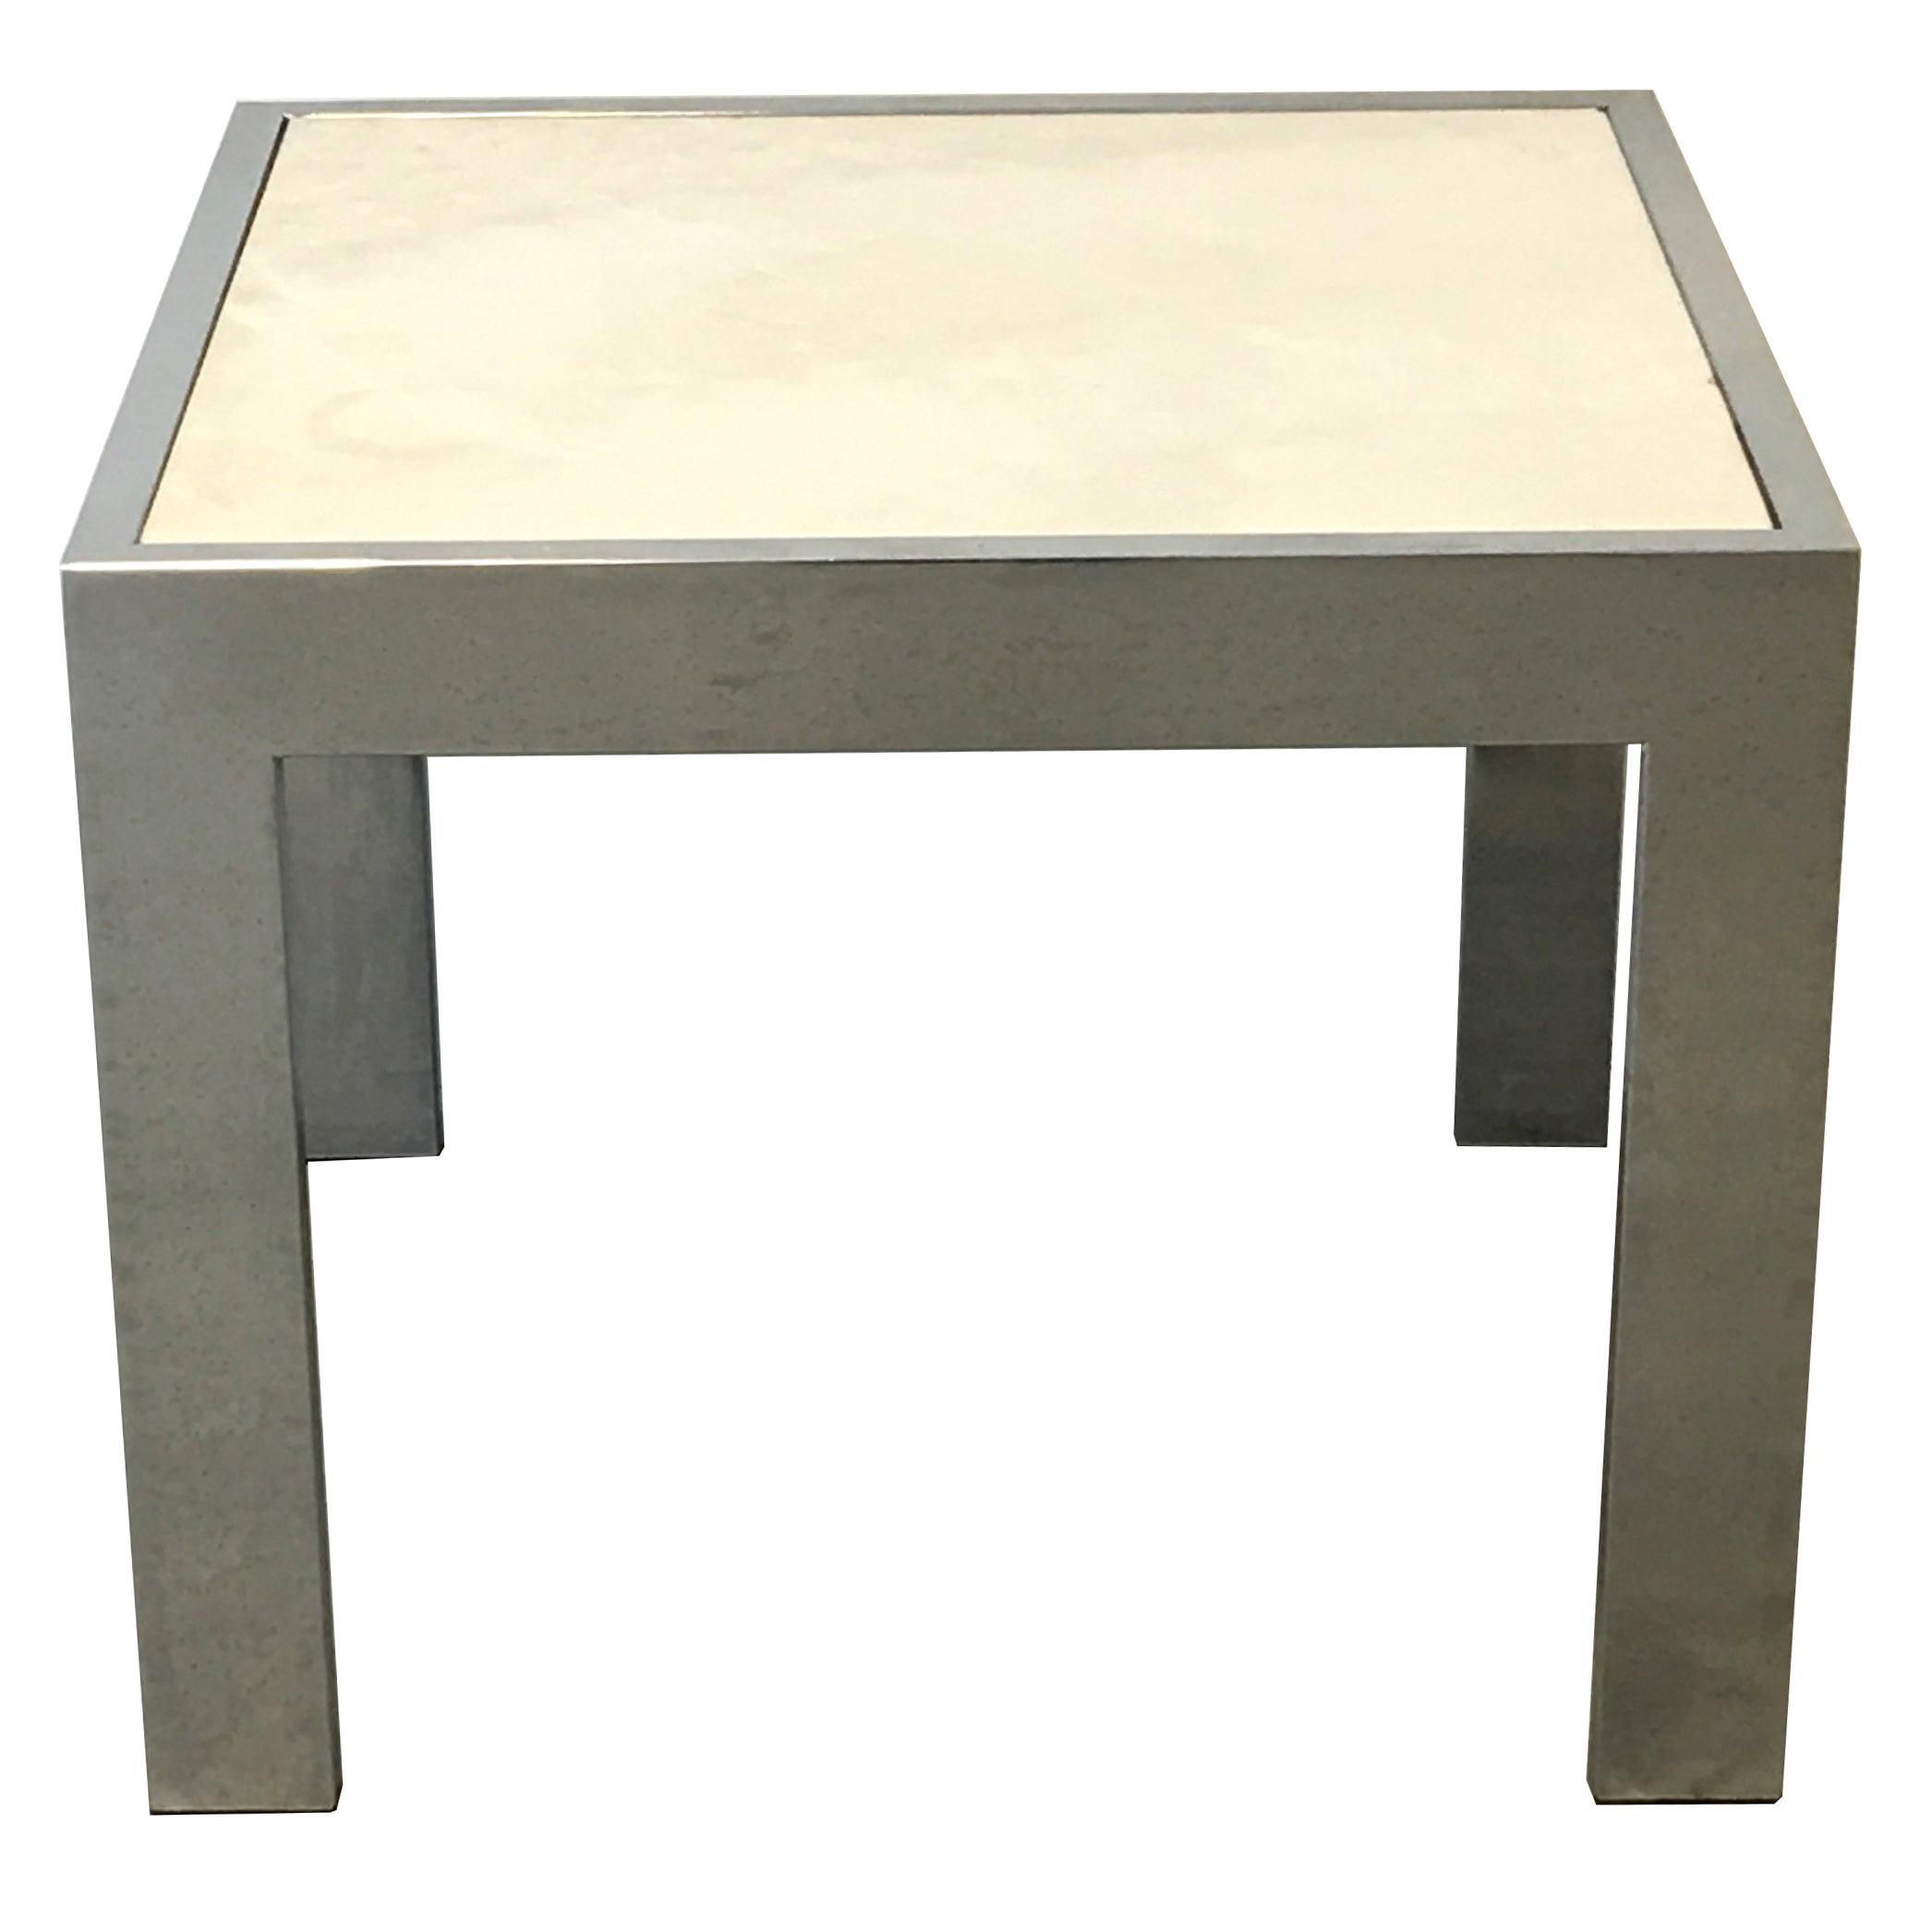 1960s Modern Milo Baughman Style Chrome and Stone Side Table For Sale